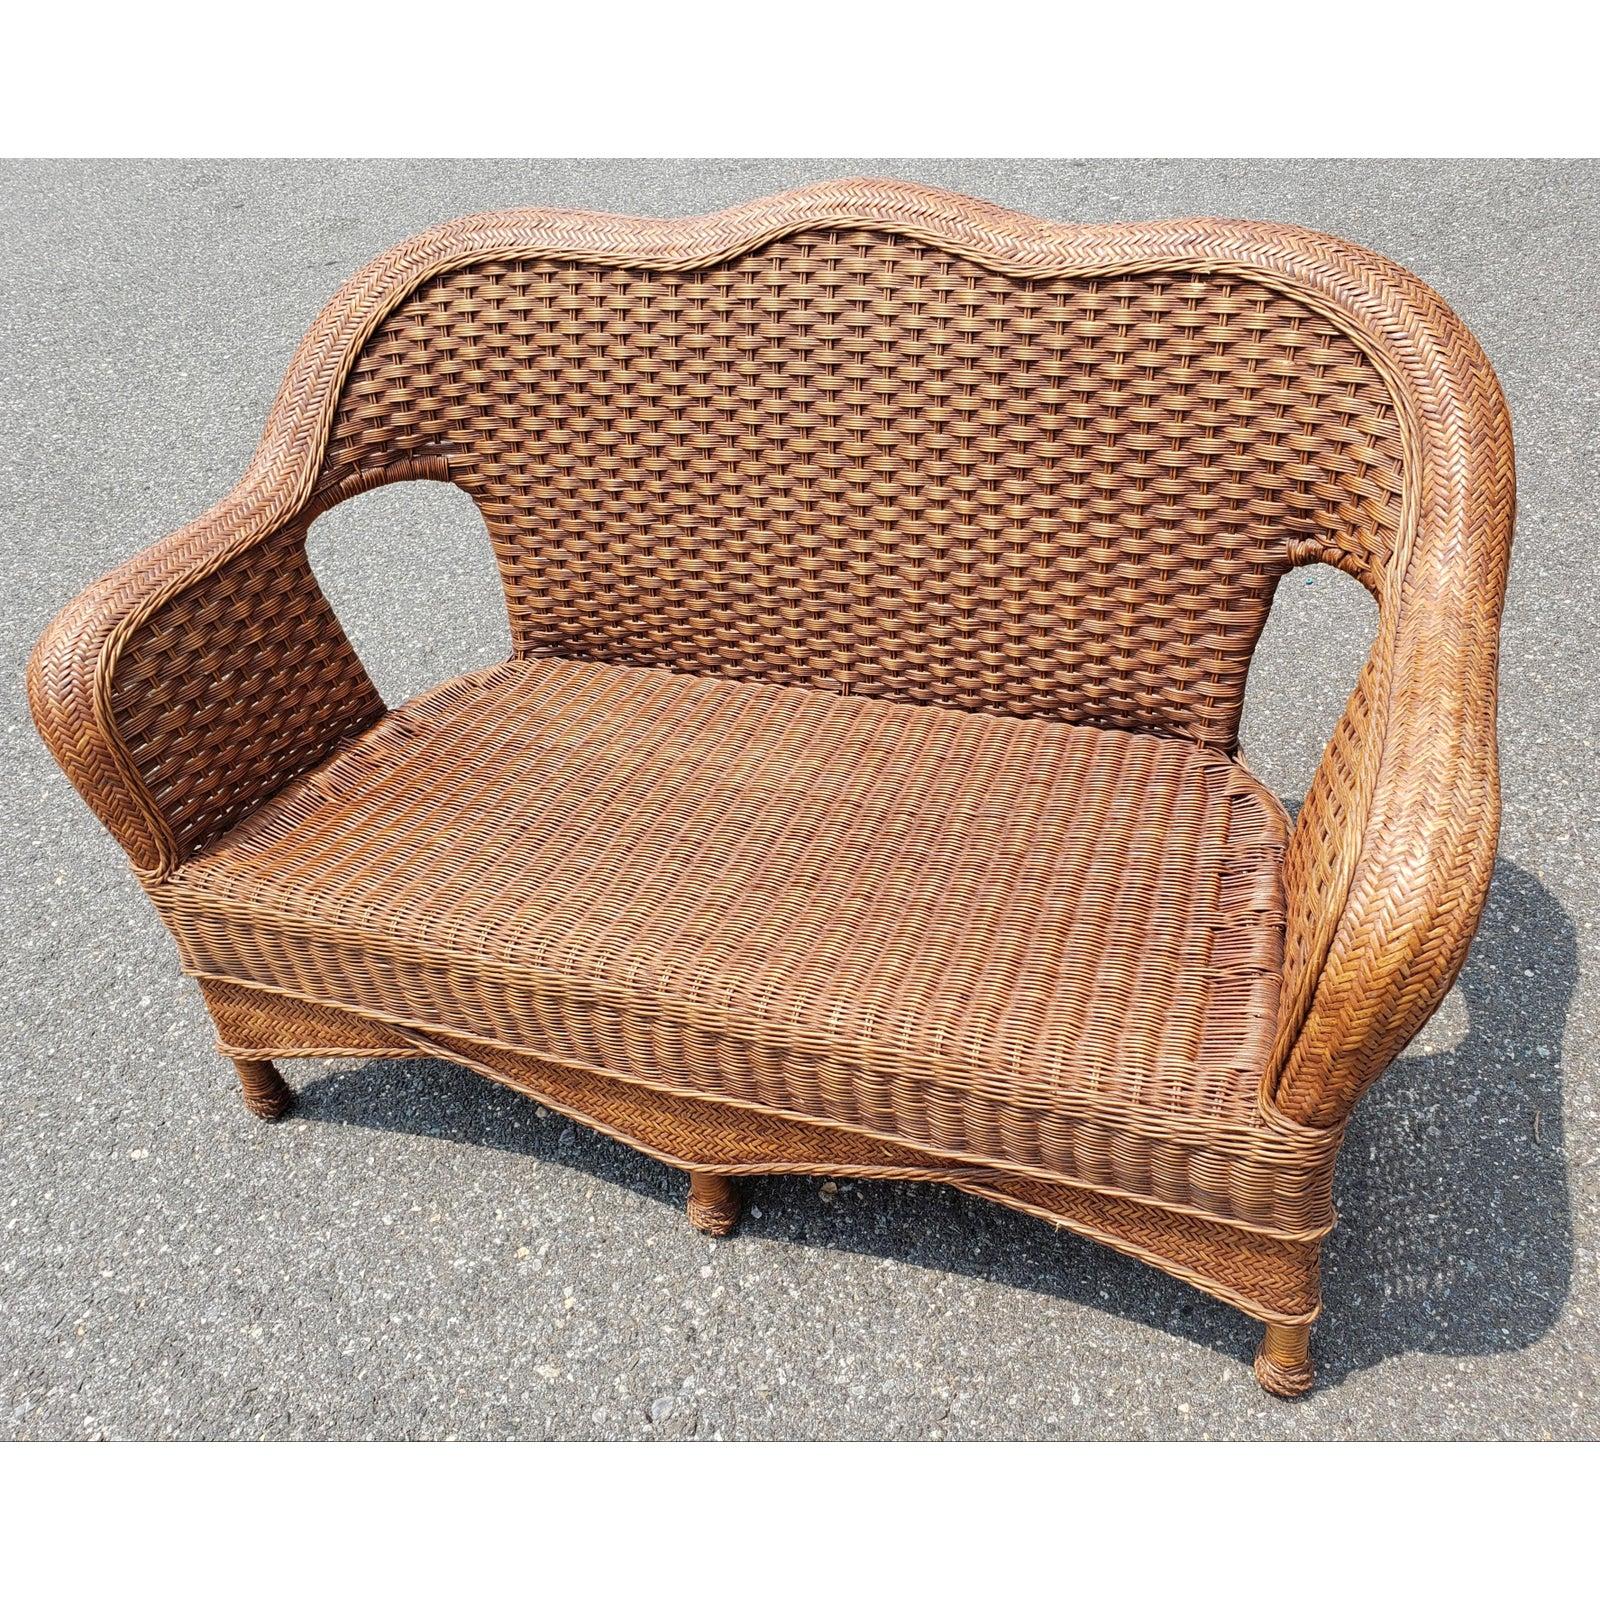 Philippine 1960s Vintage Wicker Rattan Loveseat and Chair Set in Floral Upholstery, 2 Pieces